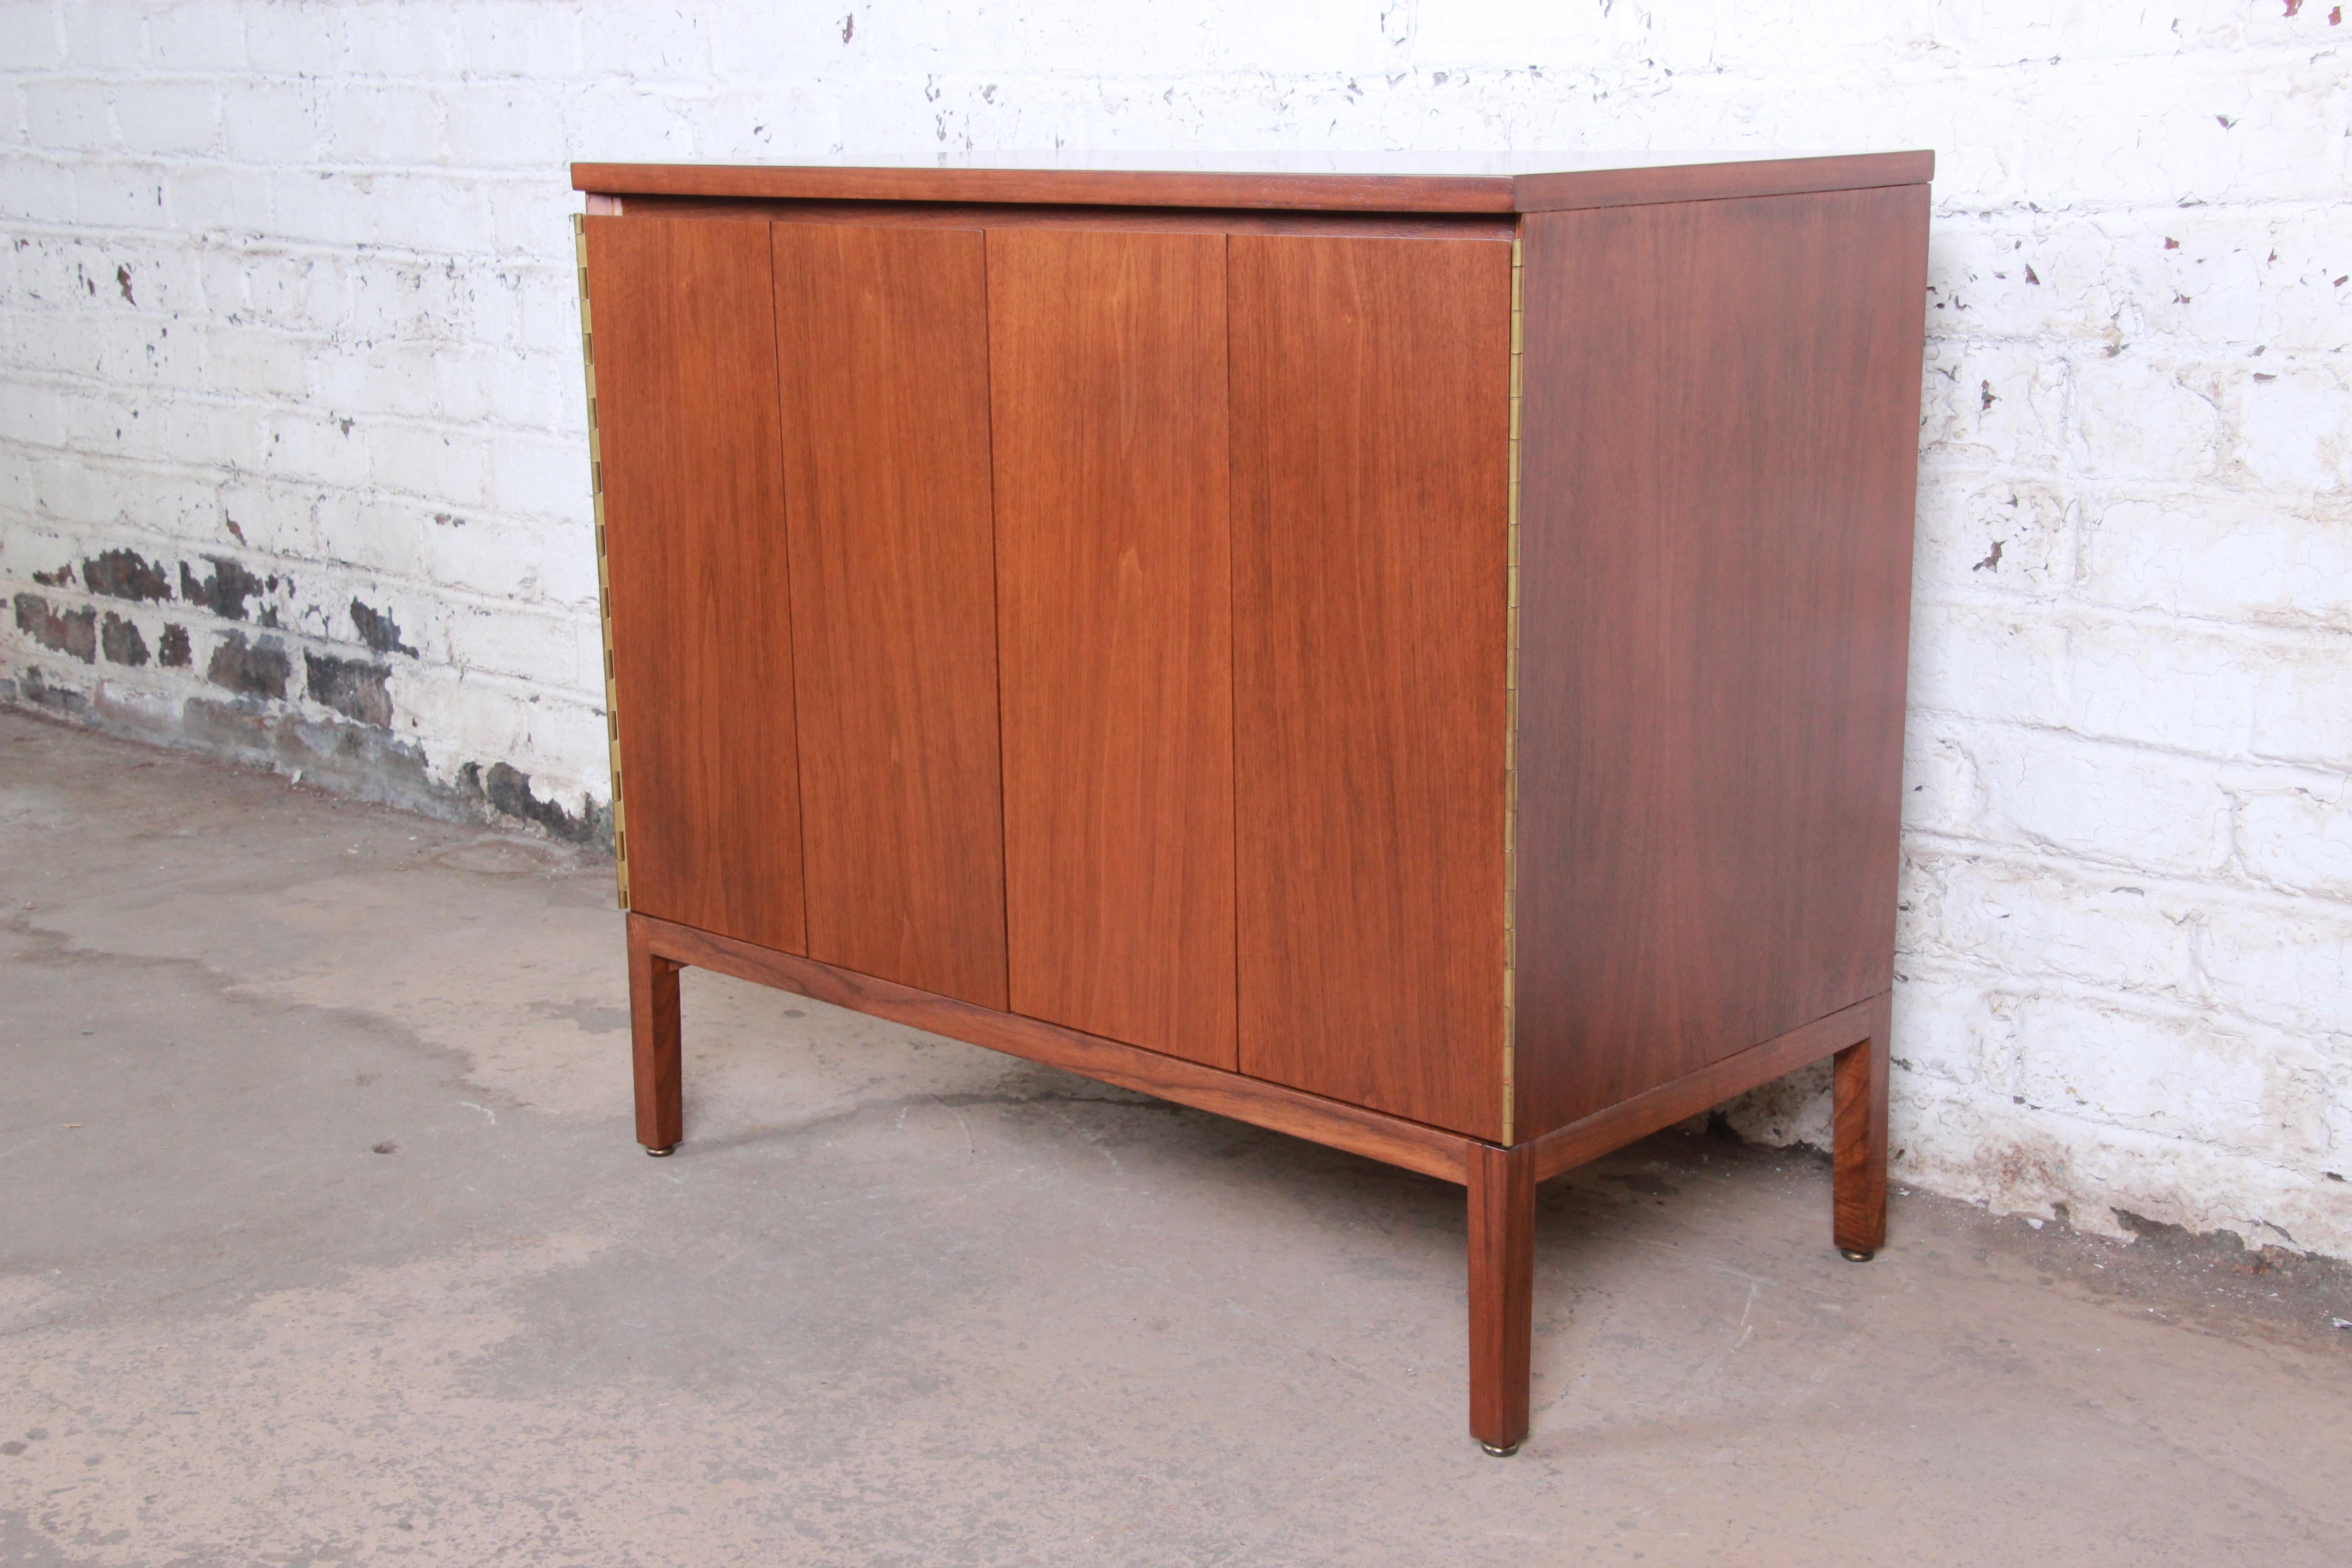 An exceptional Mid-Century Modern sideboard credenza or bar cabinet designed by Paul McCobb for his Irwin Collection line for Calvin Furniture. The cabinet features stunning Honduran mahogany wood grain and sleek midcentury lines. An excellent